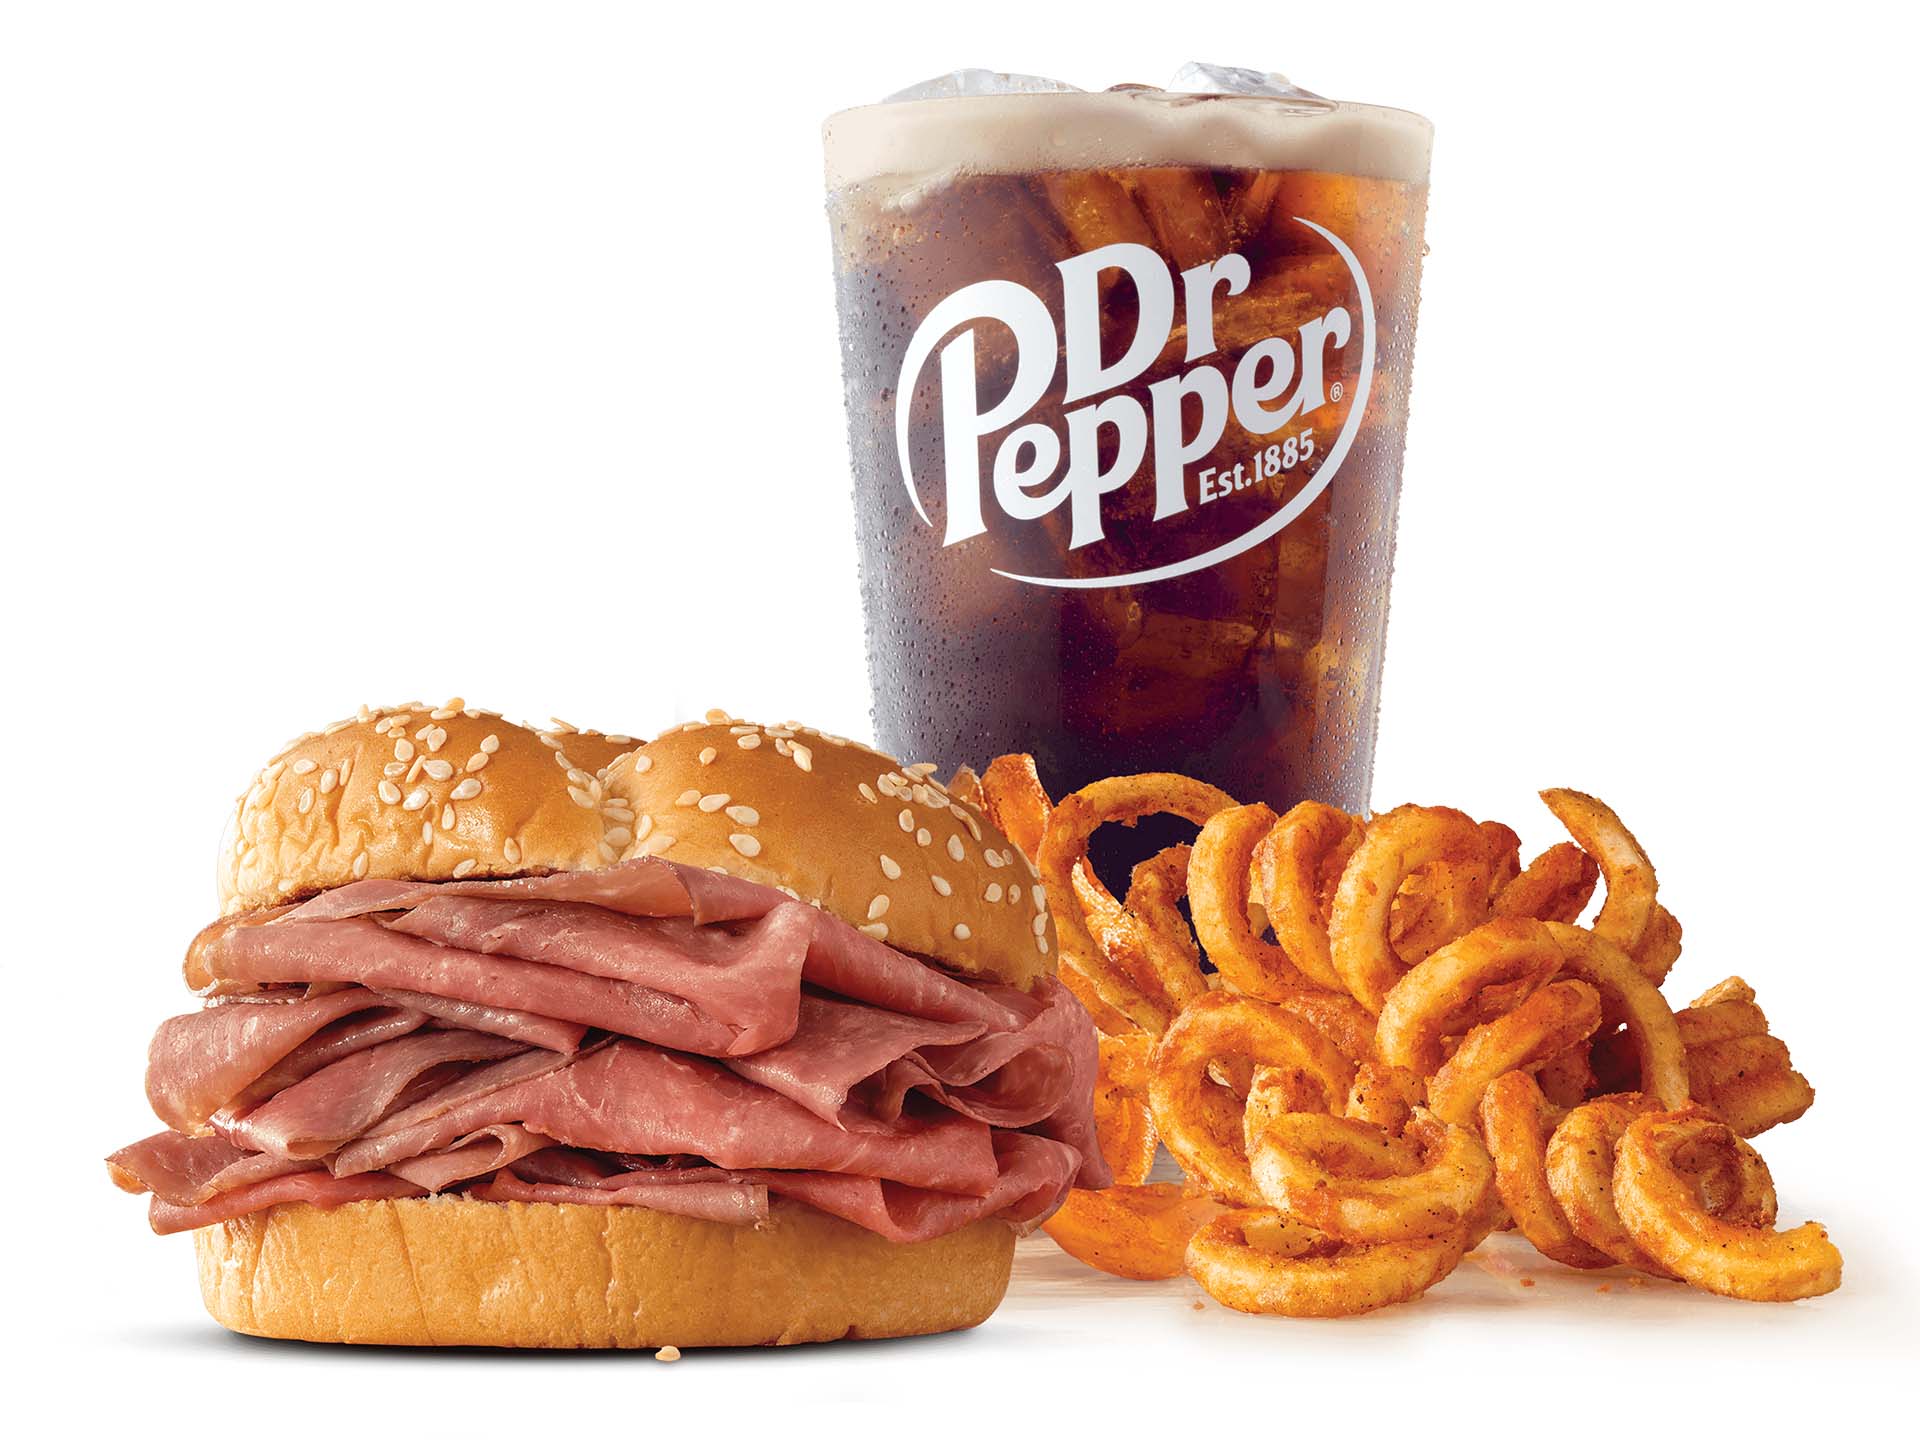 Arby's classic roast beef meal in Temple, TX